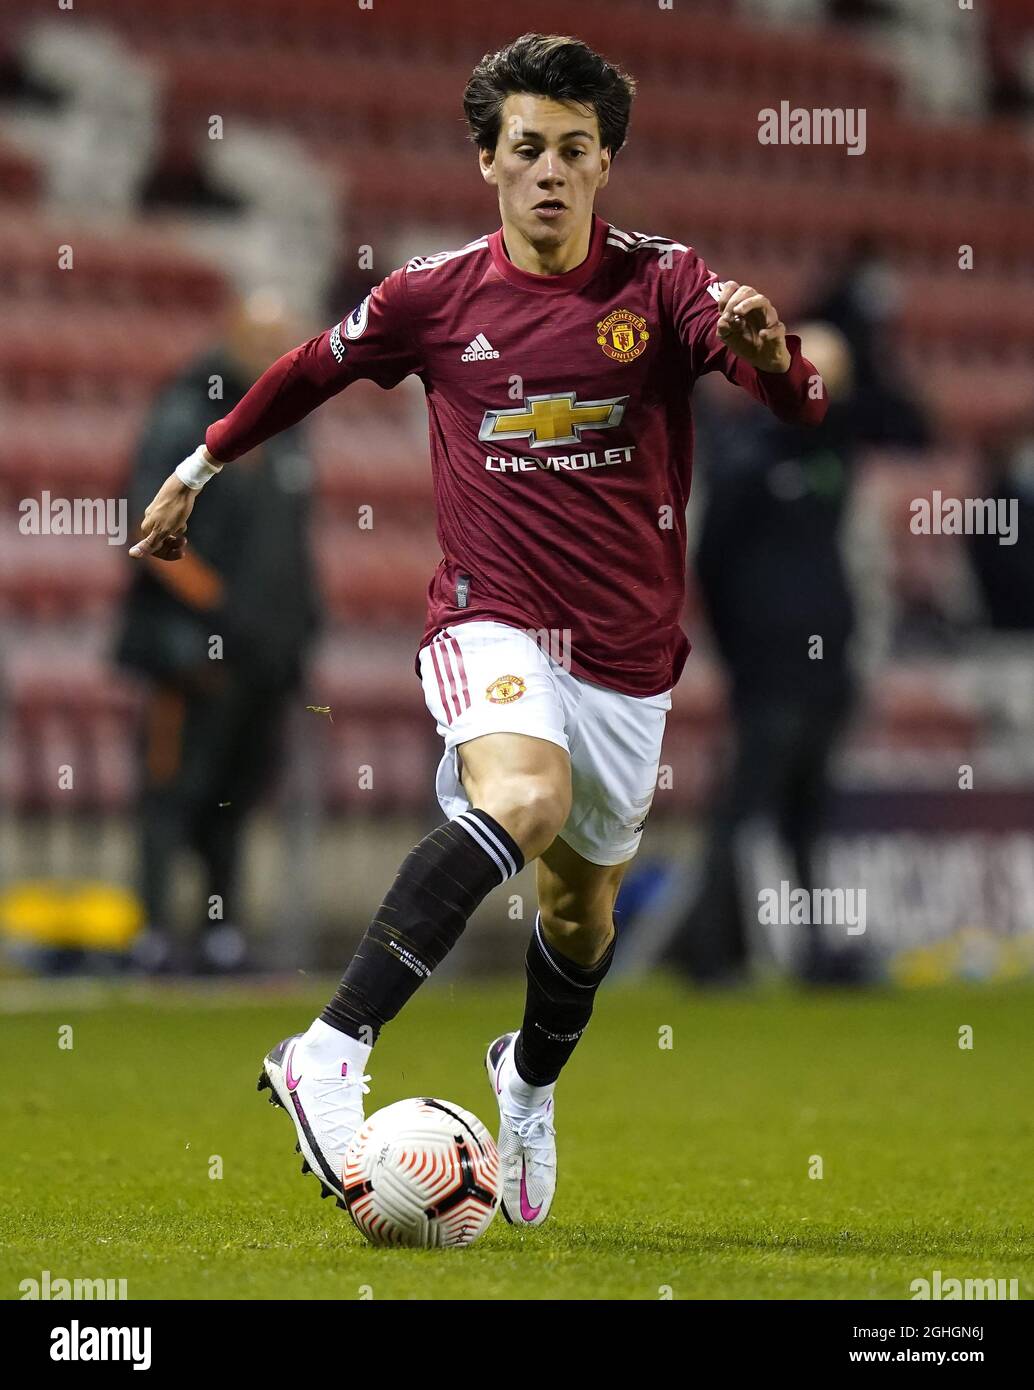 Facundo Pellistri of Manchester United during the Premier League 2 match at Leigh Sports Village, Leigh. Picture date: 23rd October 2020. Picture credit should read: Andrew Yates/Sportimage via PA Images Stock Photo